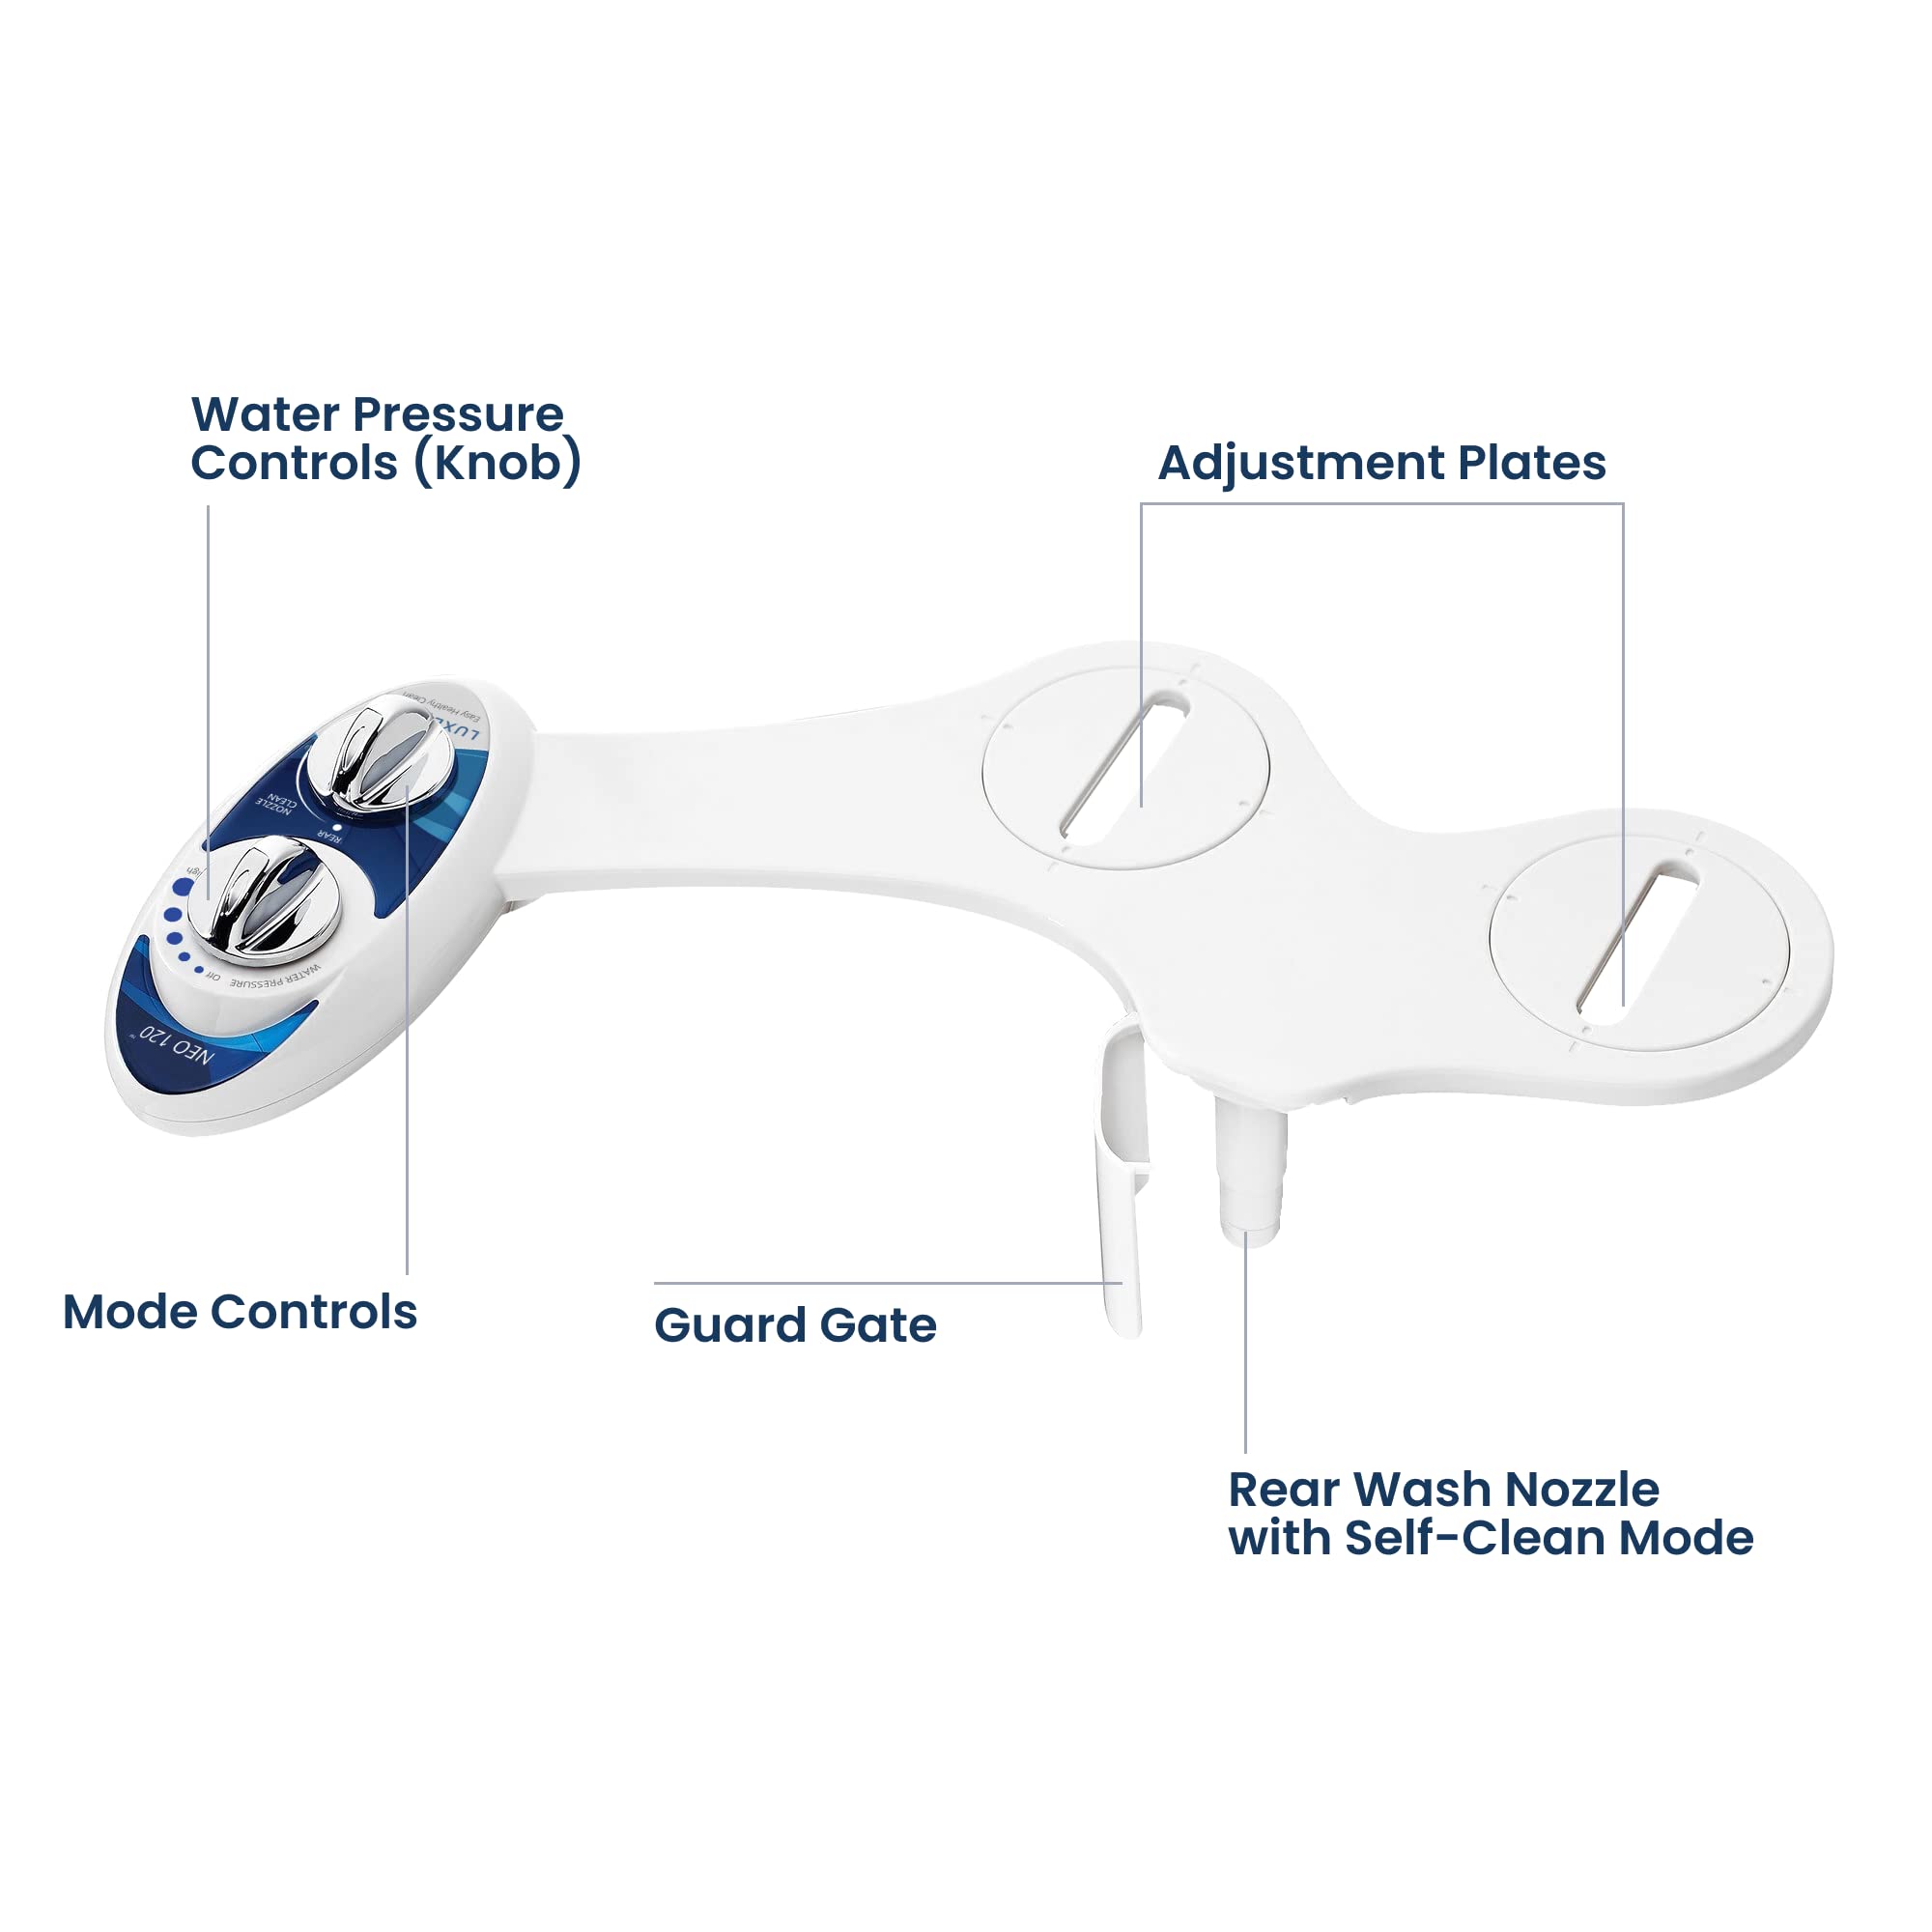 LUXE Bidet NEO 120 - Self-Cleaning Nozzle, Fresh Water Non-Electric Bidet Attachment for Toilet Seat, Adjustable Water Pressure, Rear Wash (Blue)